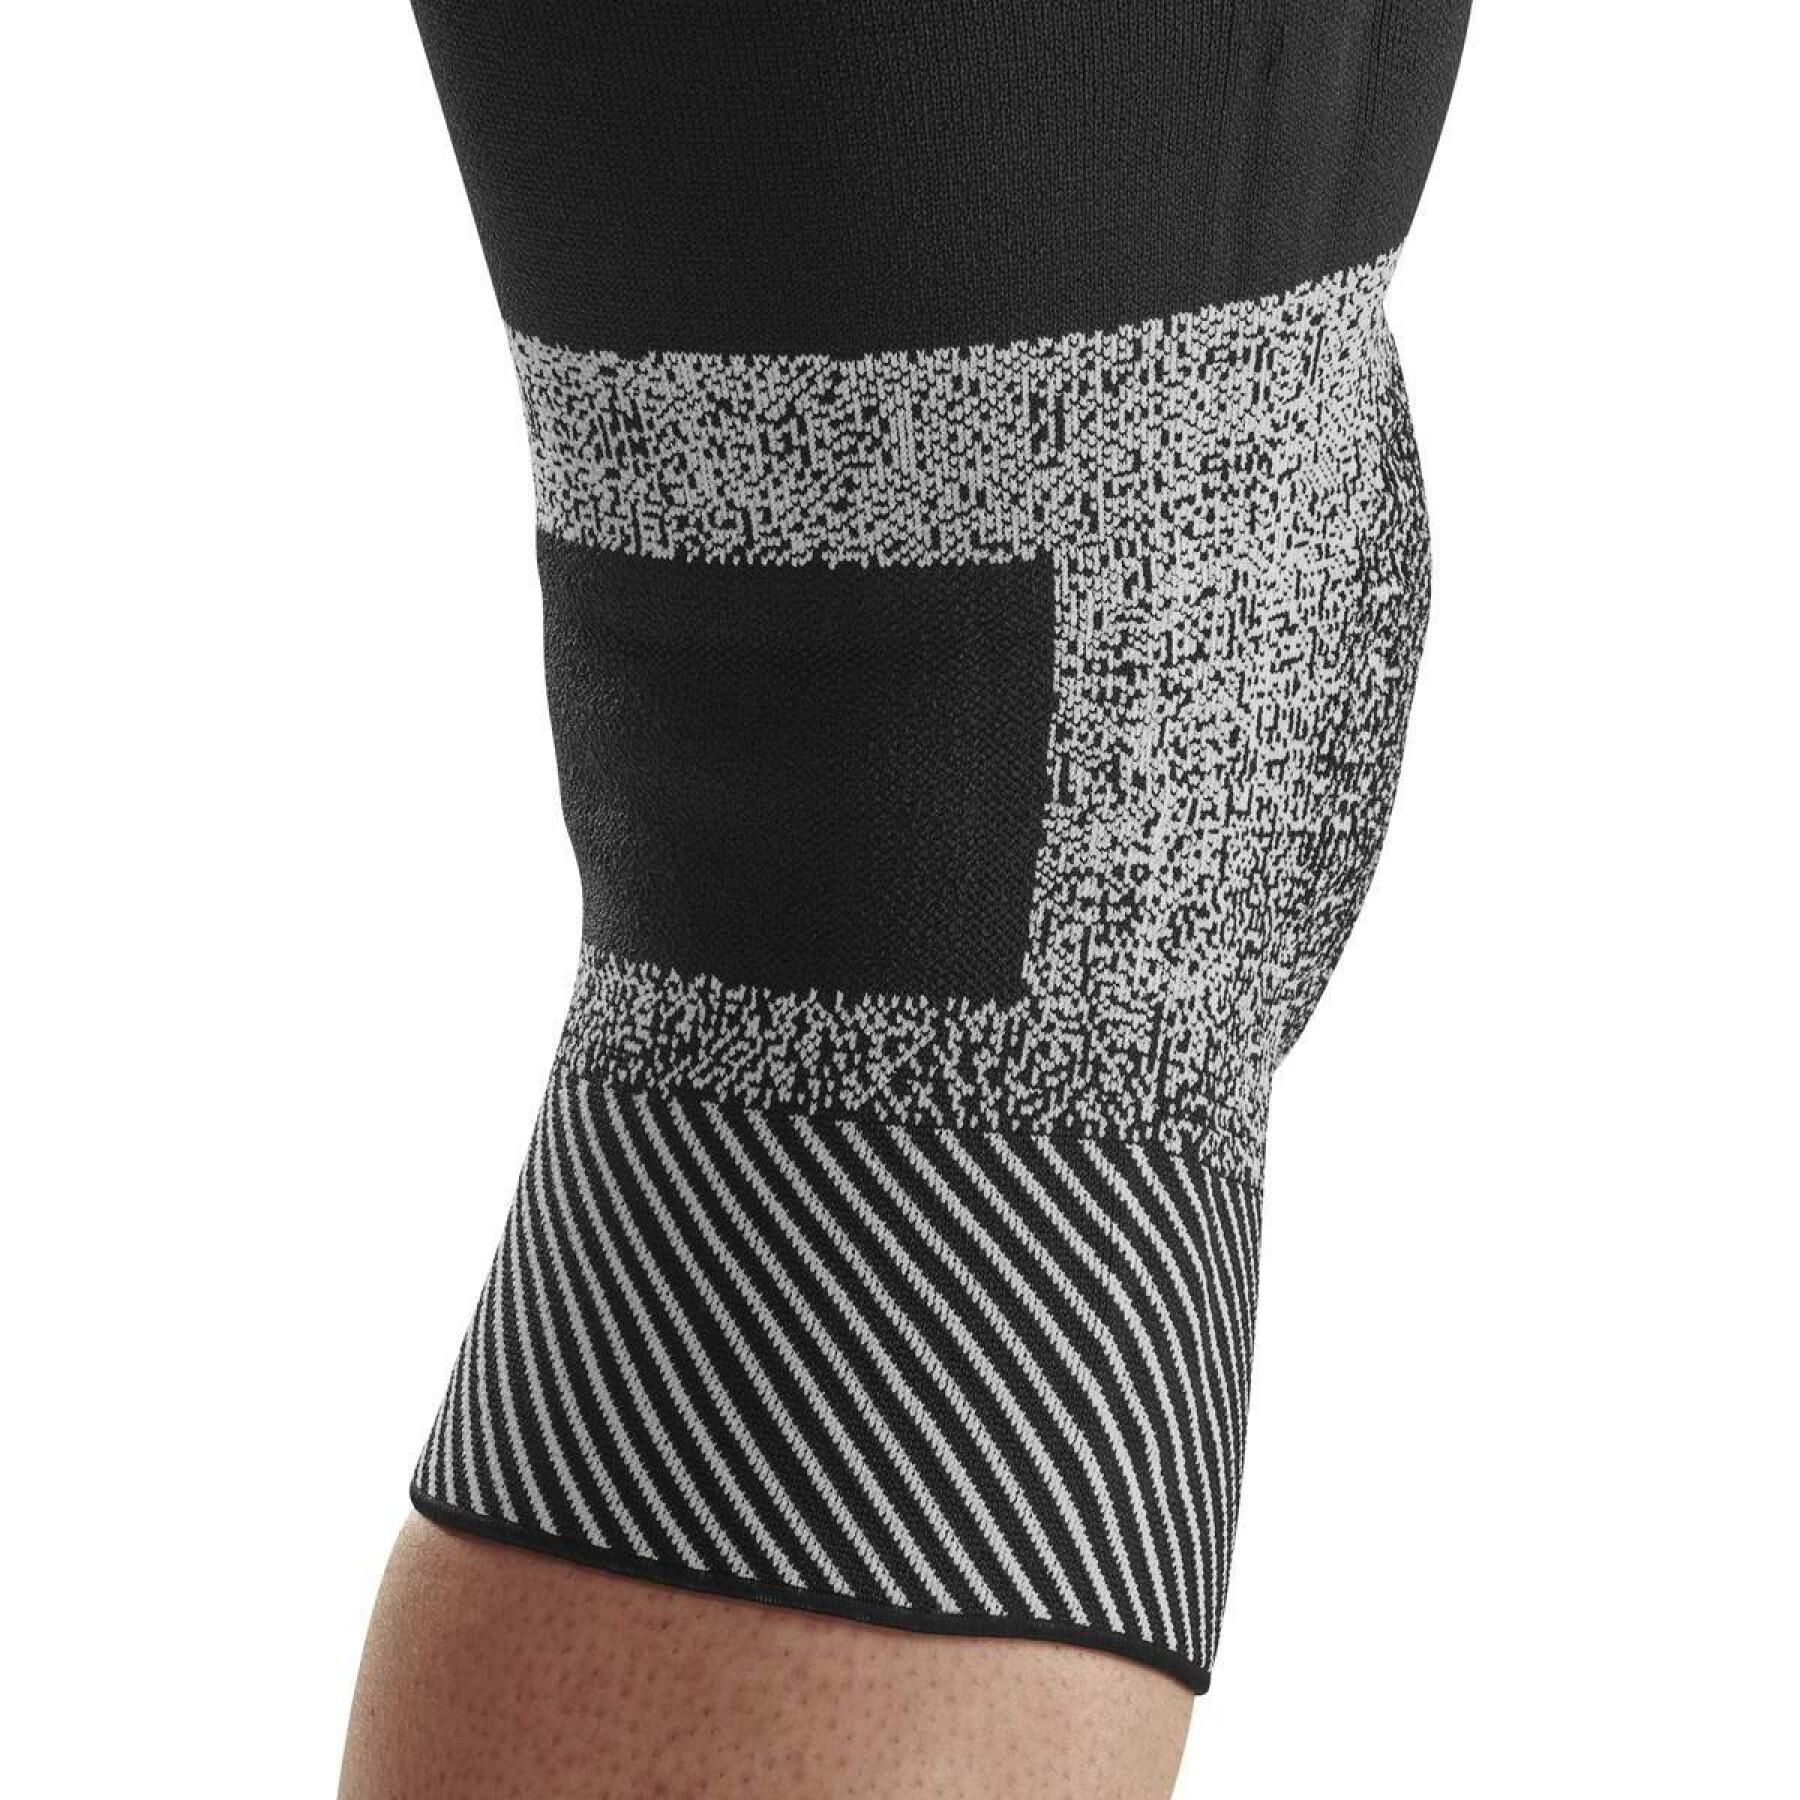 Knee support max CEP Compression